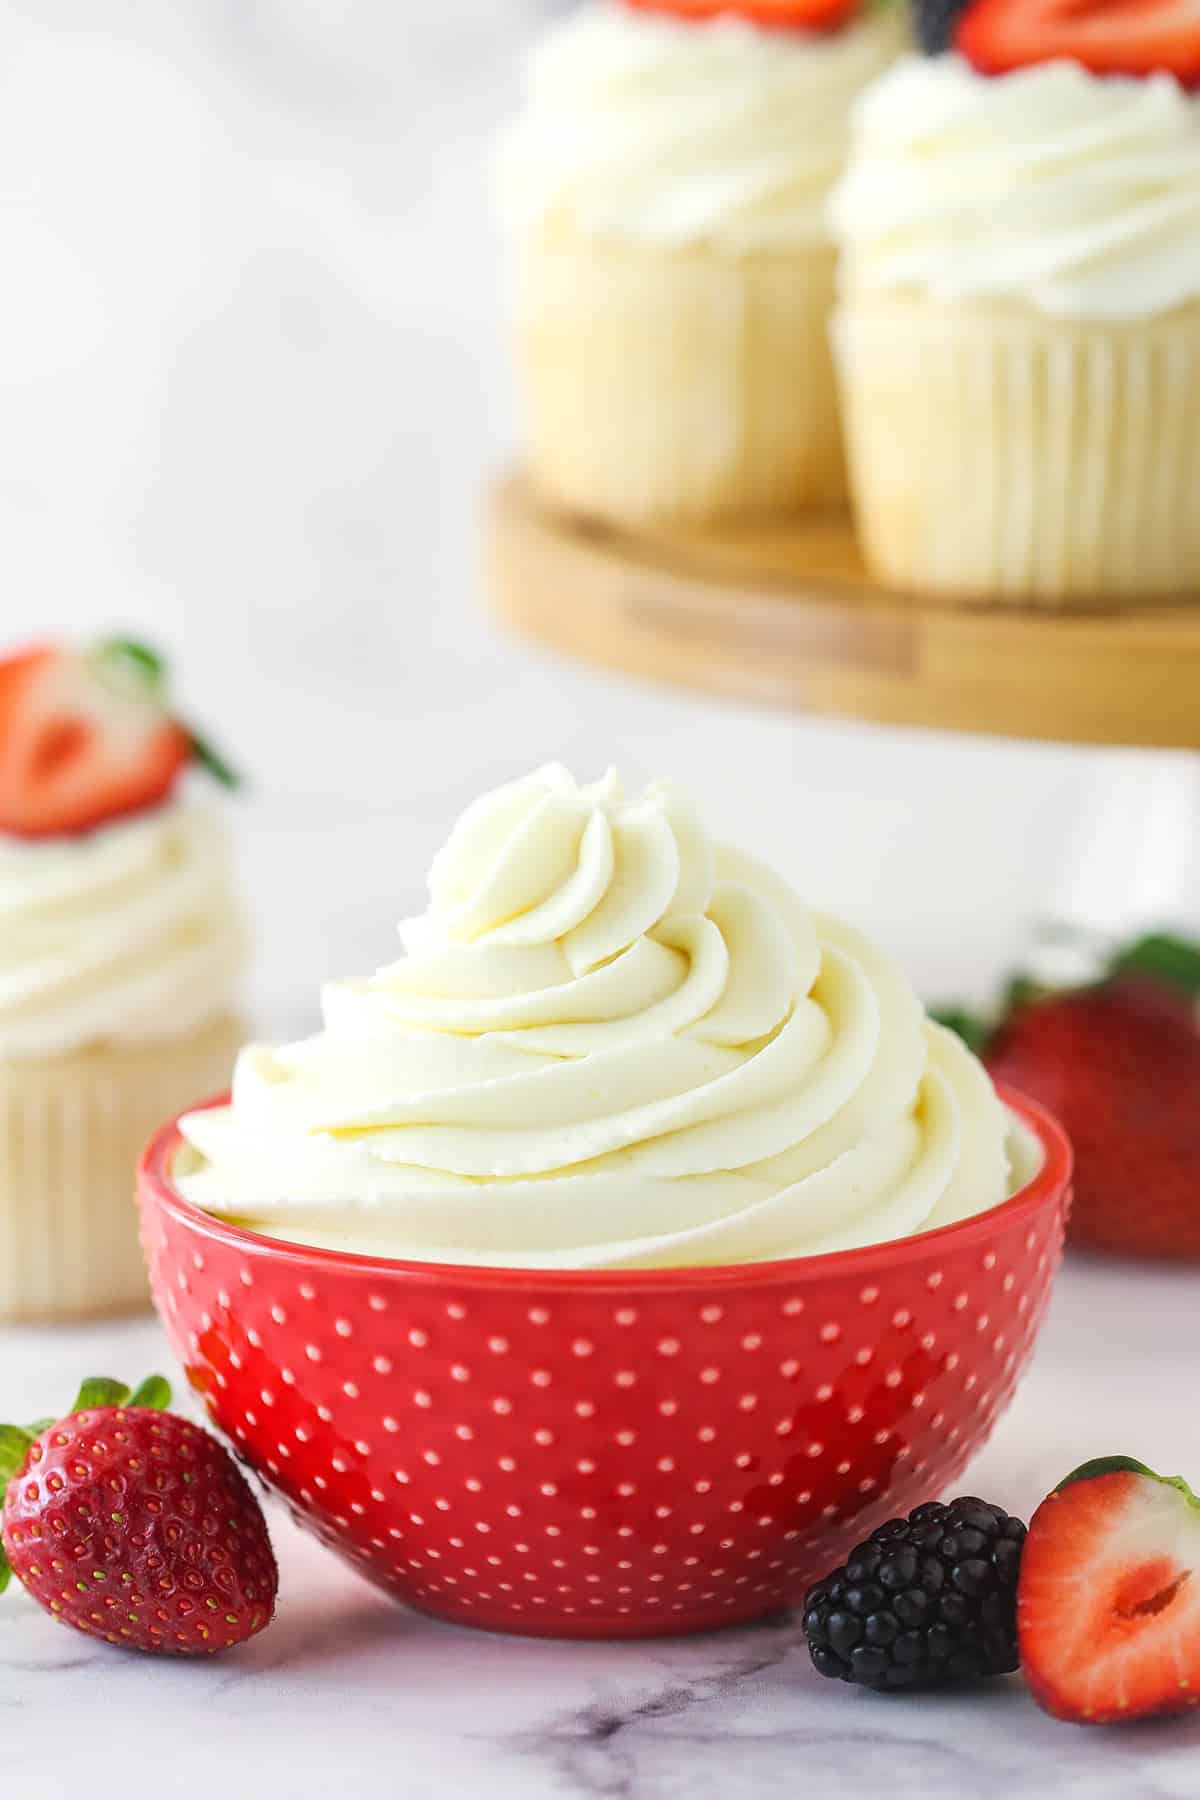 Whipped cream frosting in a decorative bowl near frosted cupcake surrounded by fresh berries.